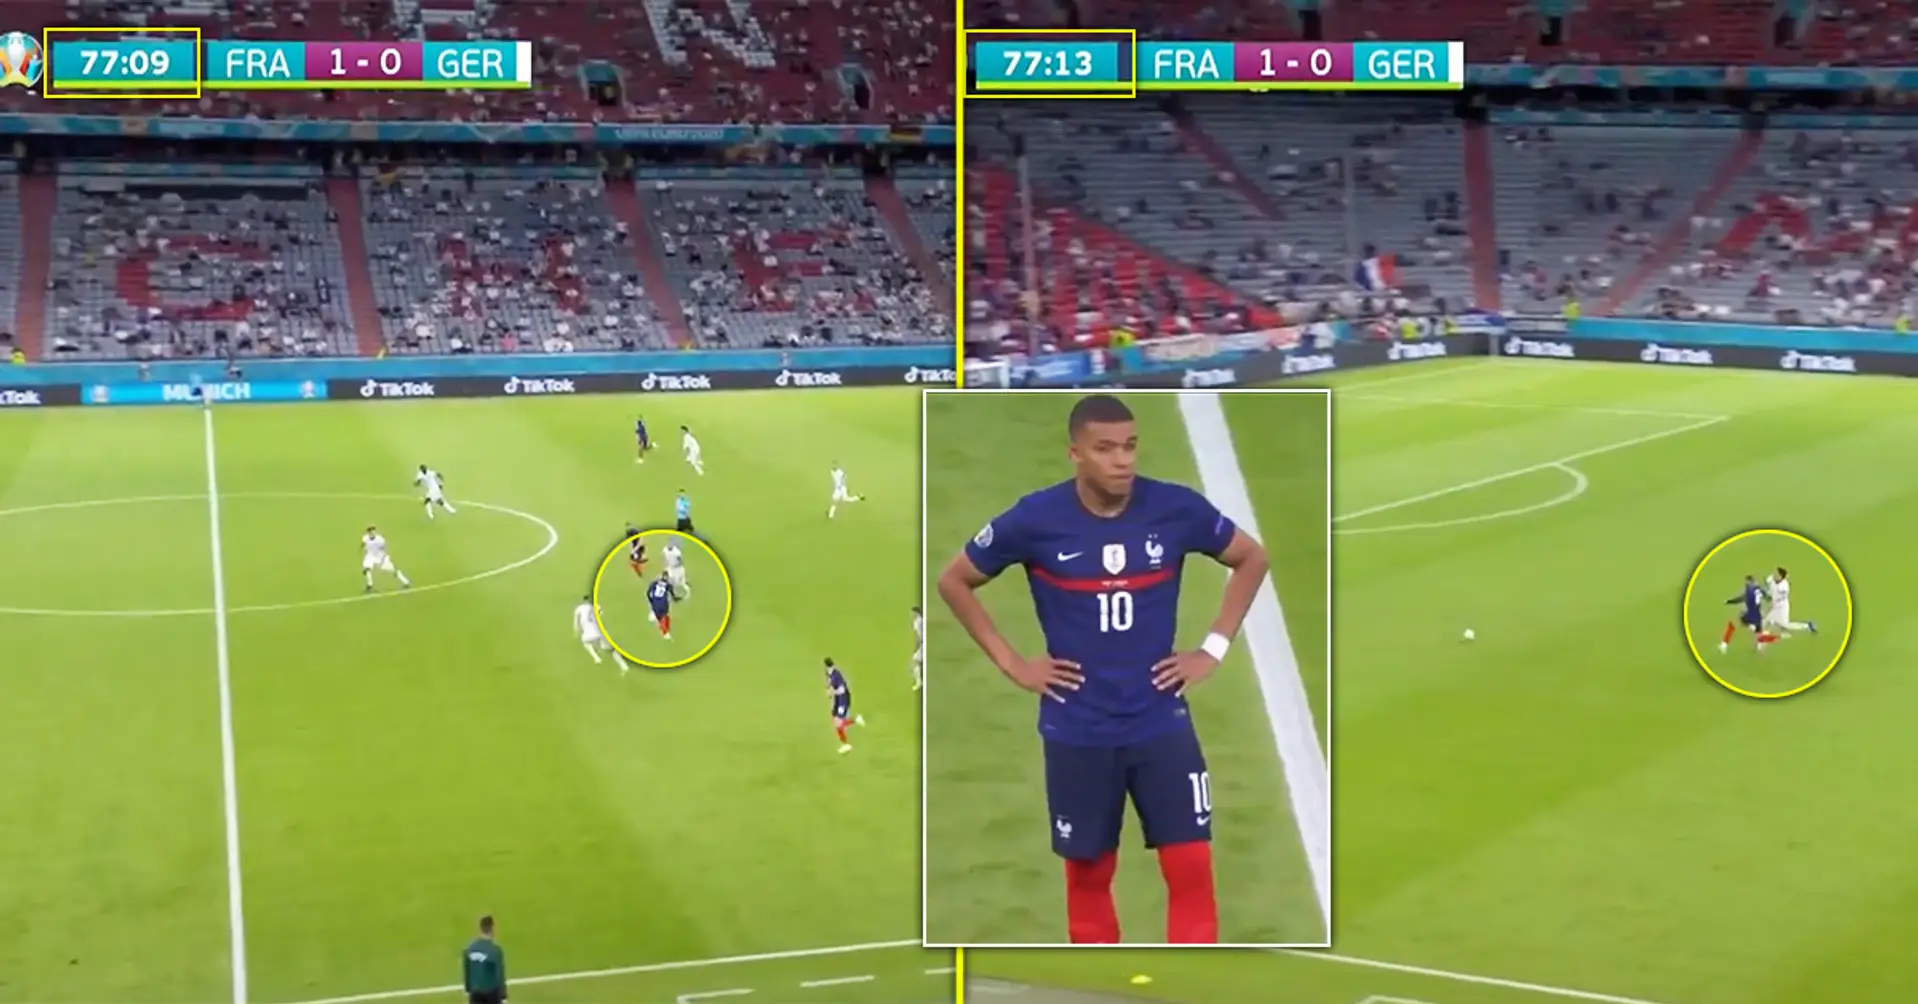 Fans spot incredible moment during France-Germany match that highlights Kylian Mbappe's outrageous talent